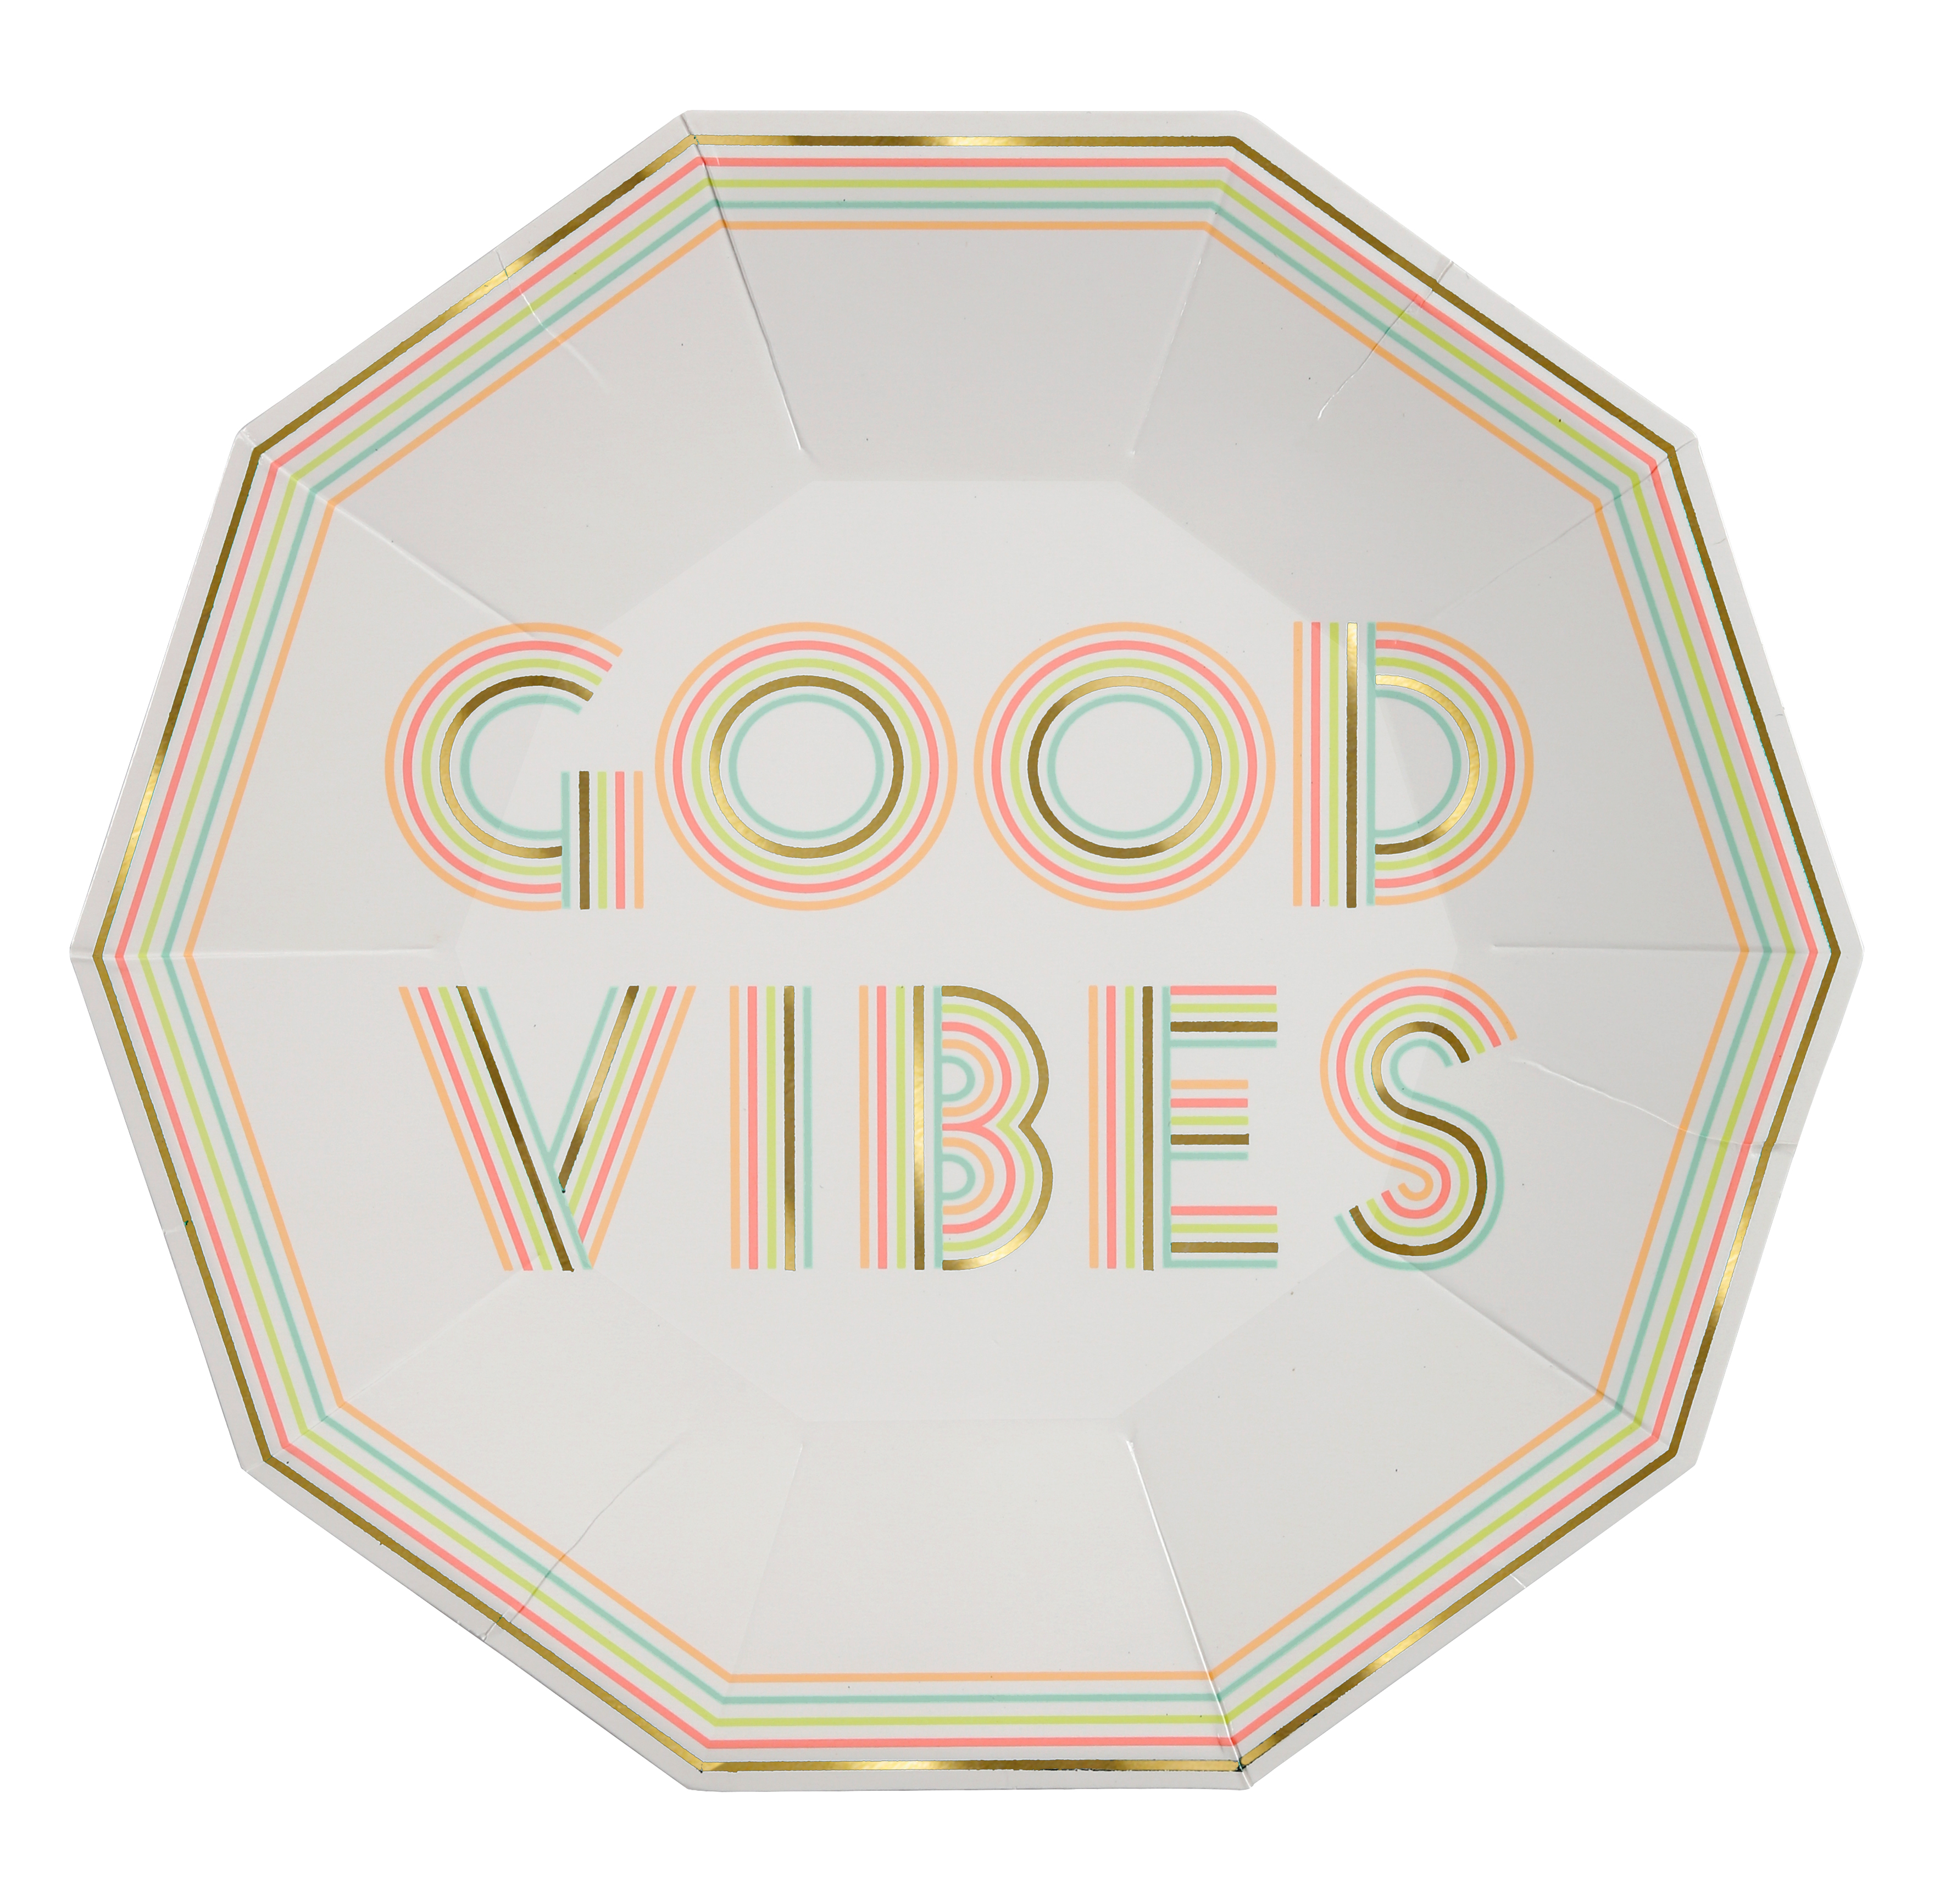 Good vibes party plate